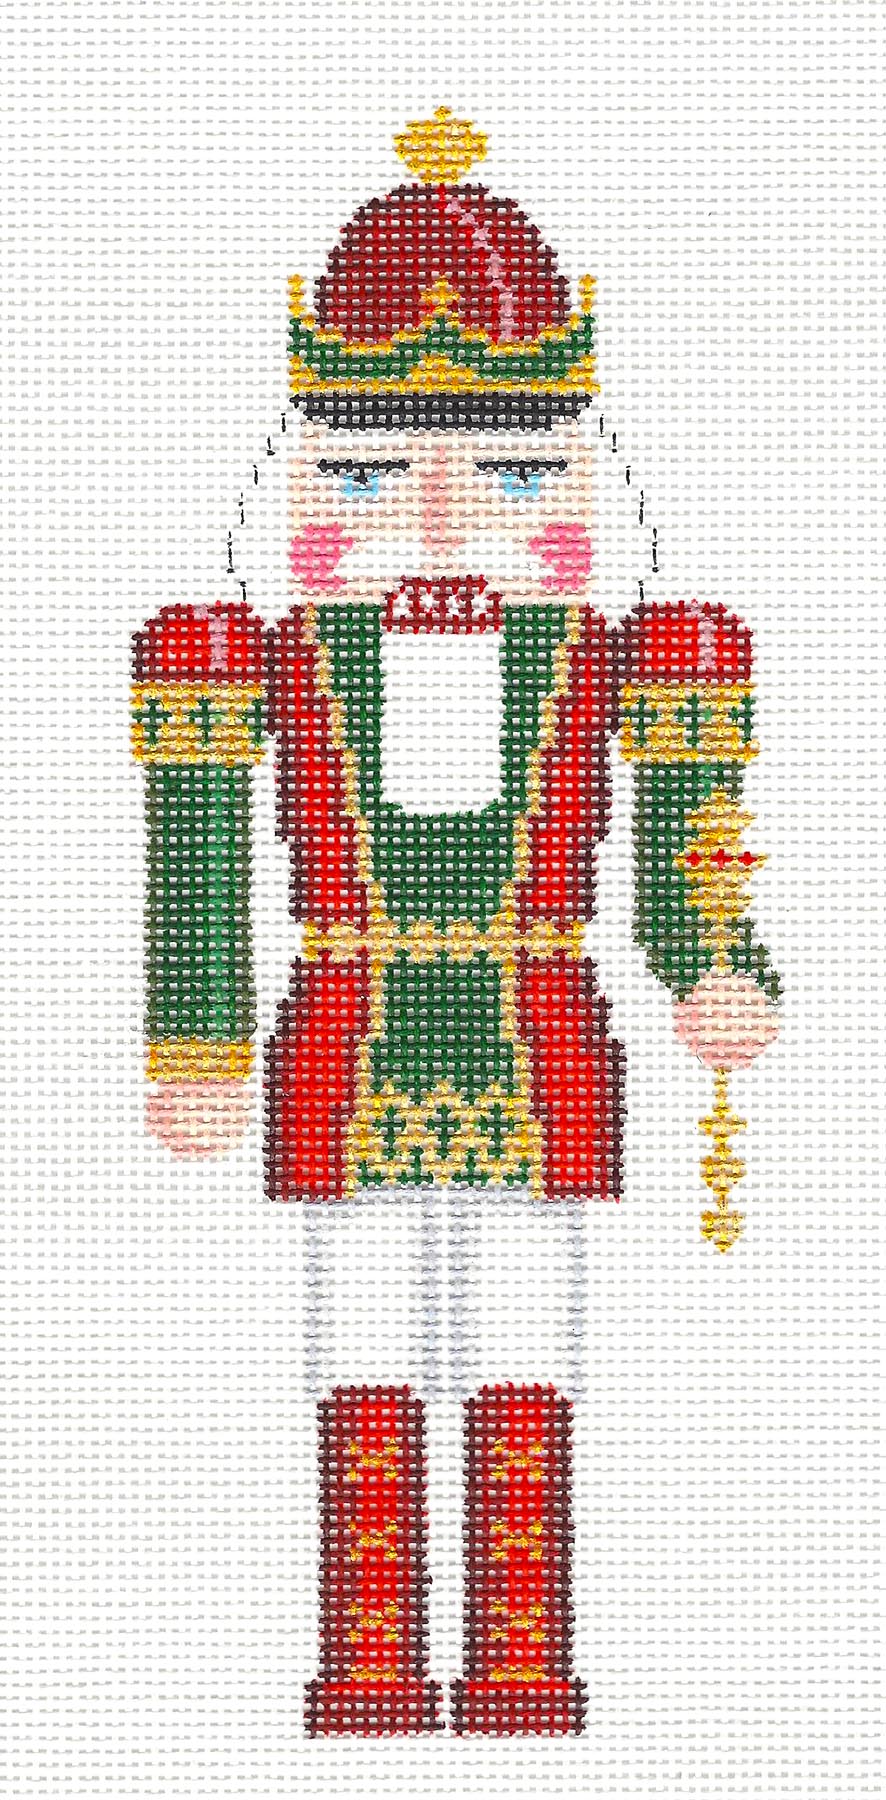 Canvas ~ Nutcracker King in Red, Green & Gold handpainted Needlepoint Canvas by Susan Roberts